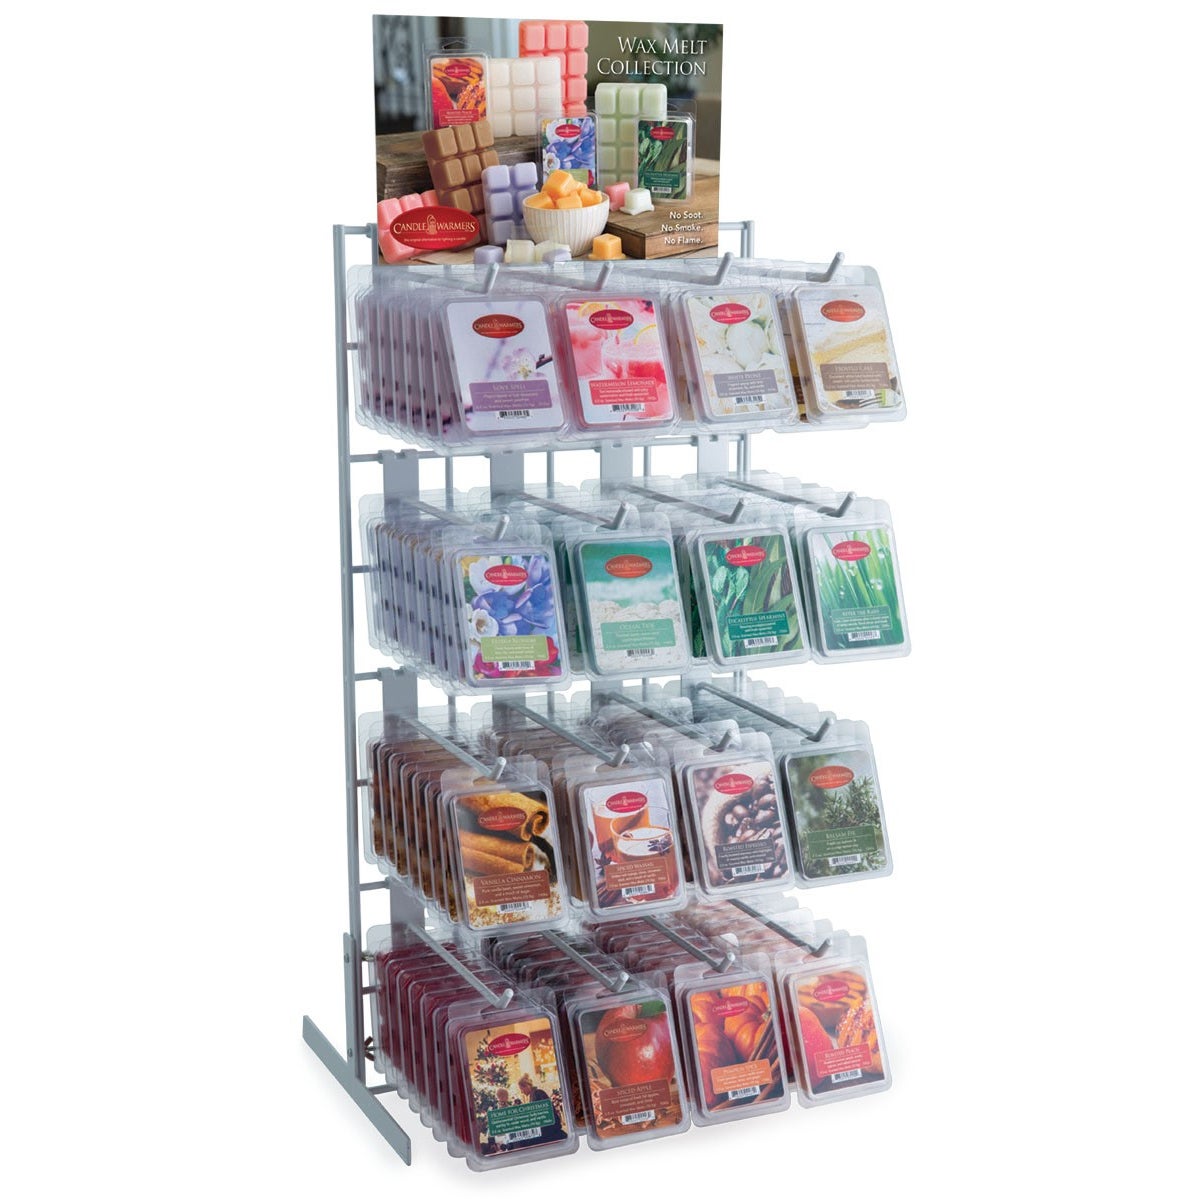 Display - White Wire Wax Melt and Pluggable Display - Holds 96 2.5 oz Wax Melts or 42 2.5 oz Wax Mel